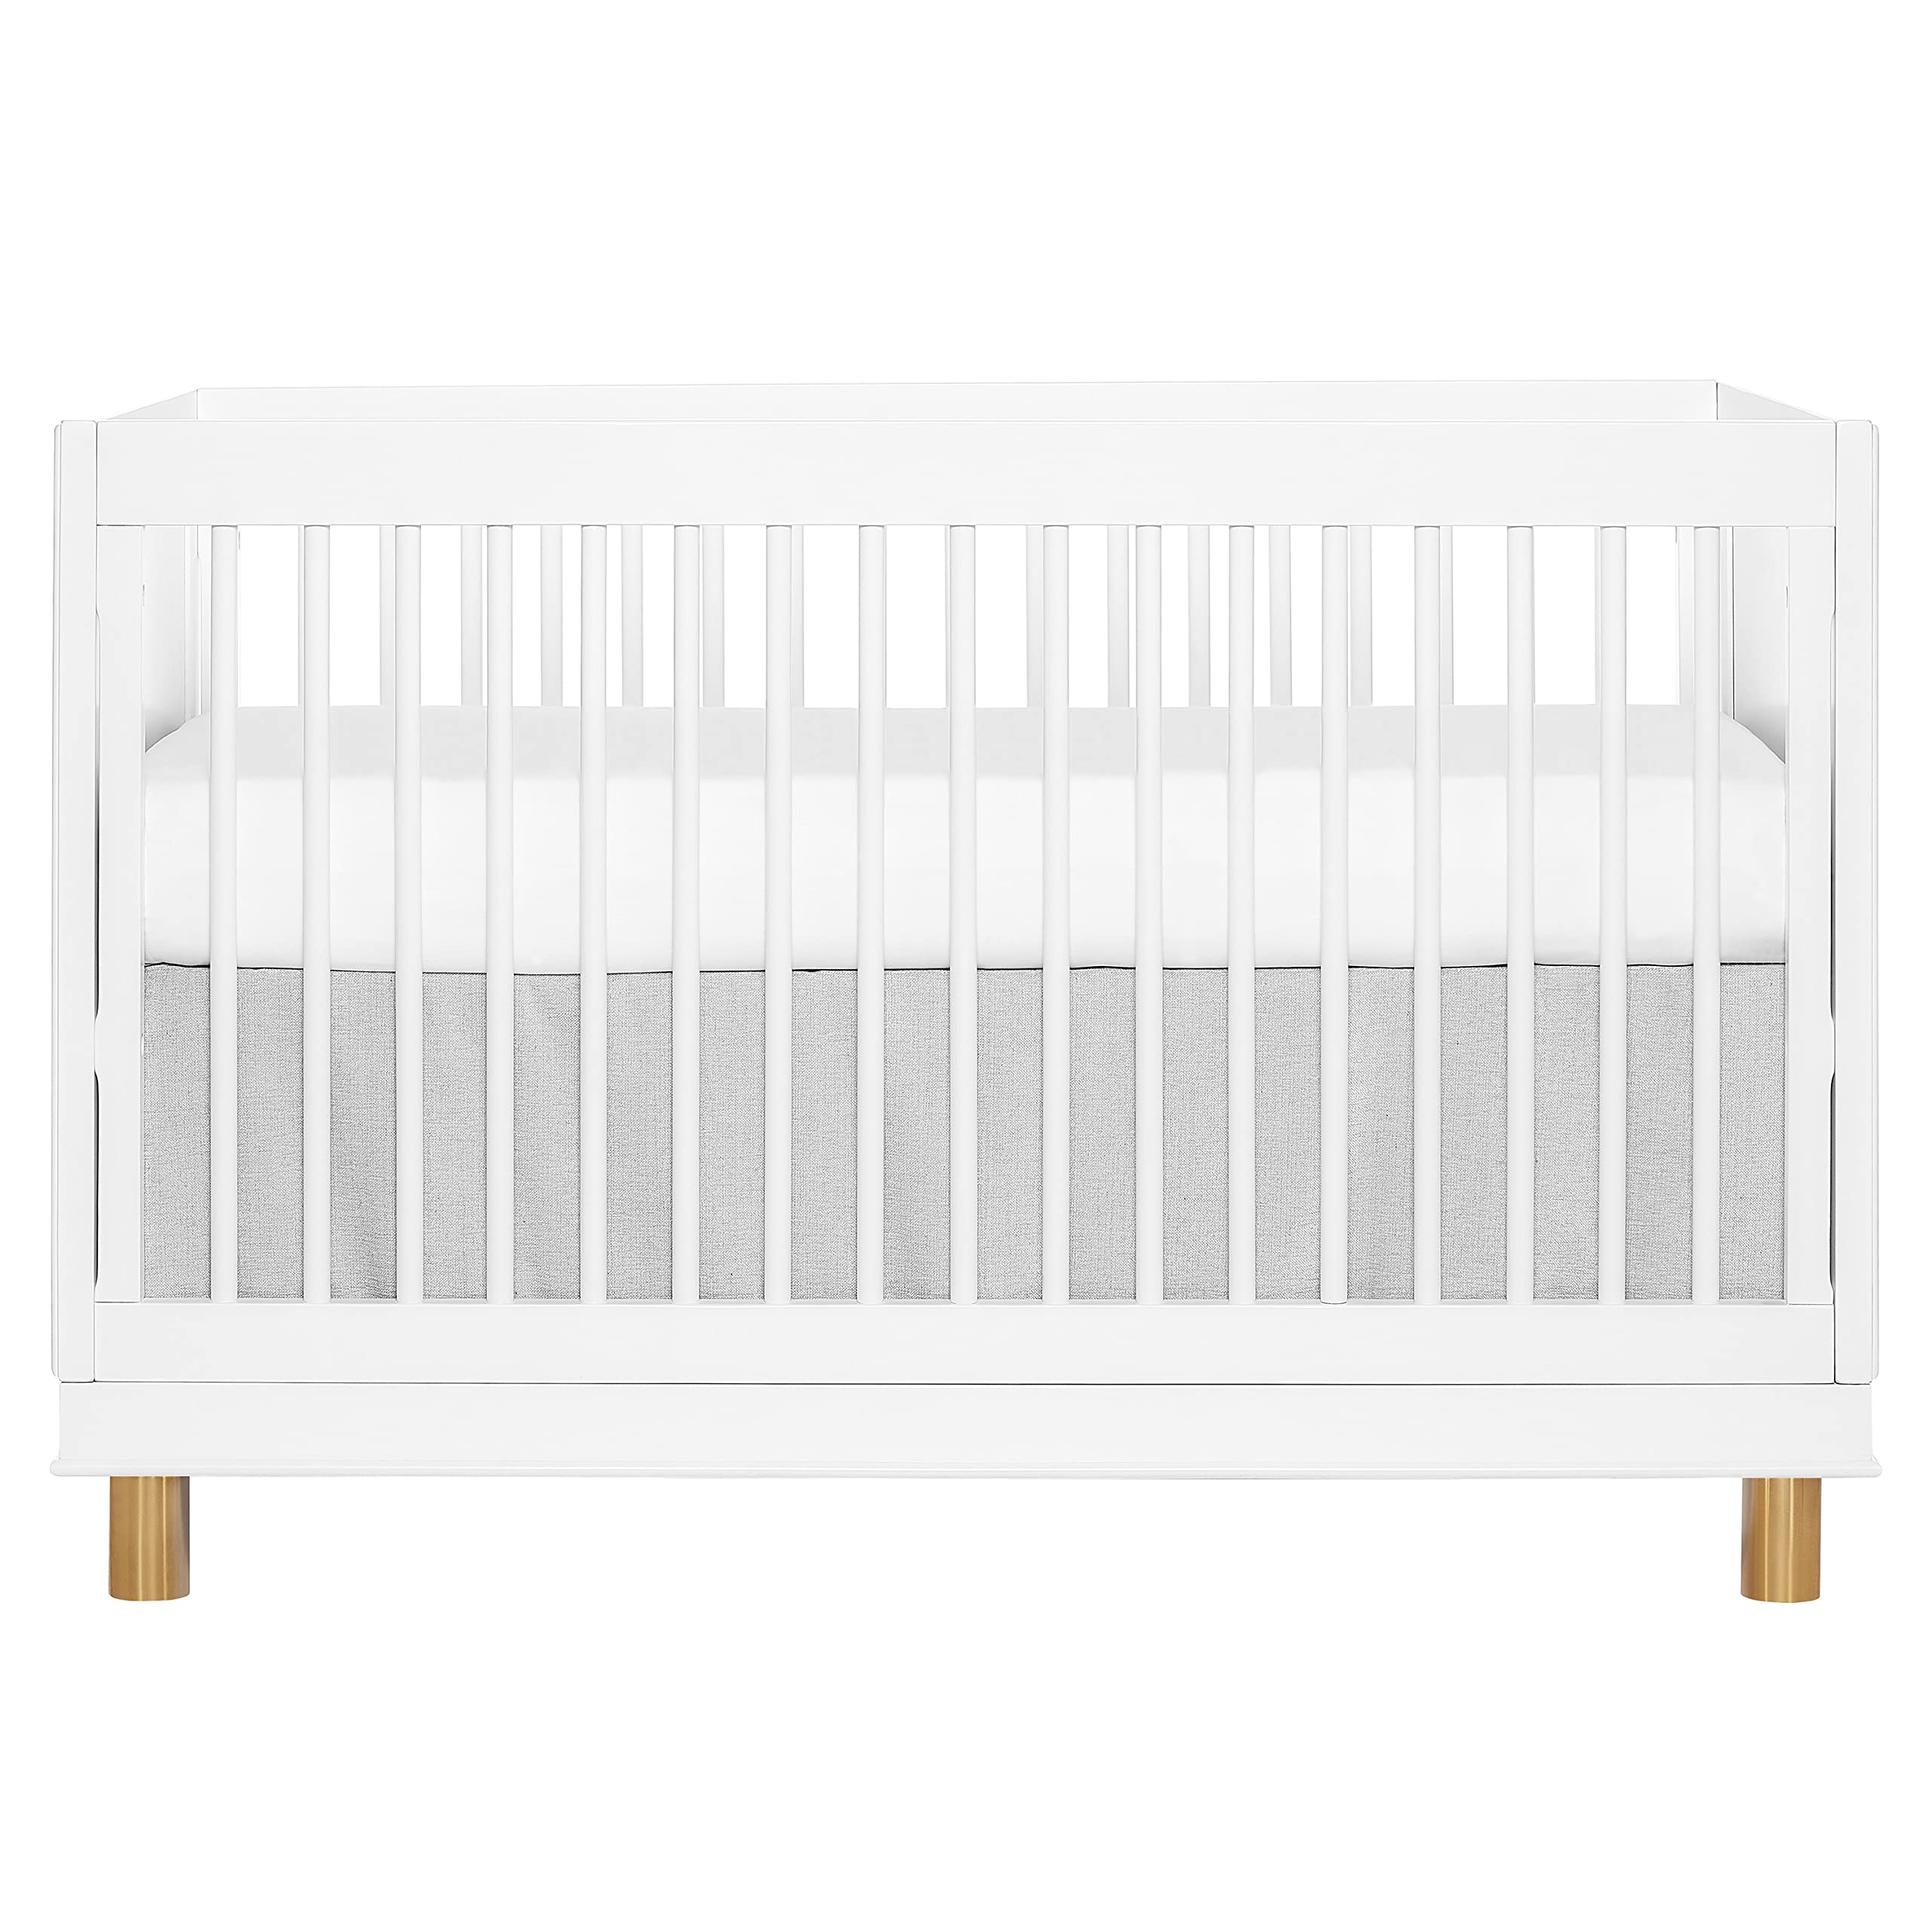 Evolur Loft Art Deco 3-in-1 Convertible Crib in White with Gold Hardware, Greenguard Gold Certified, 3 Mattress Height Settings, Features Rounded Spindles, Converts to Toddler Bed & Daybed